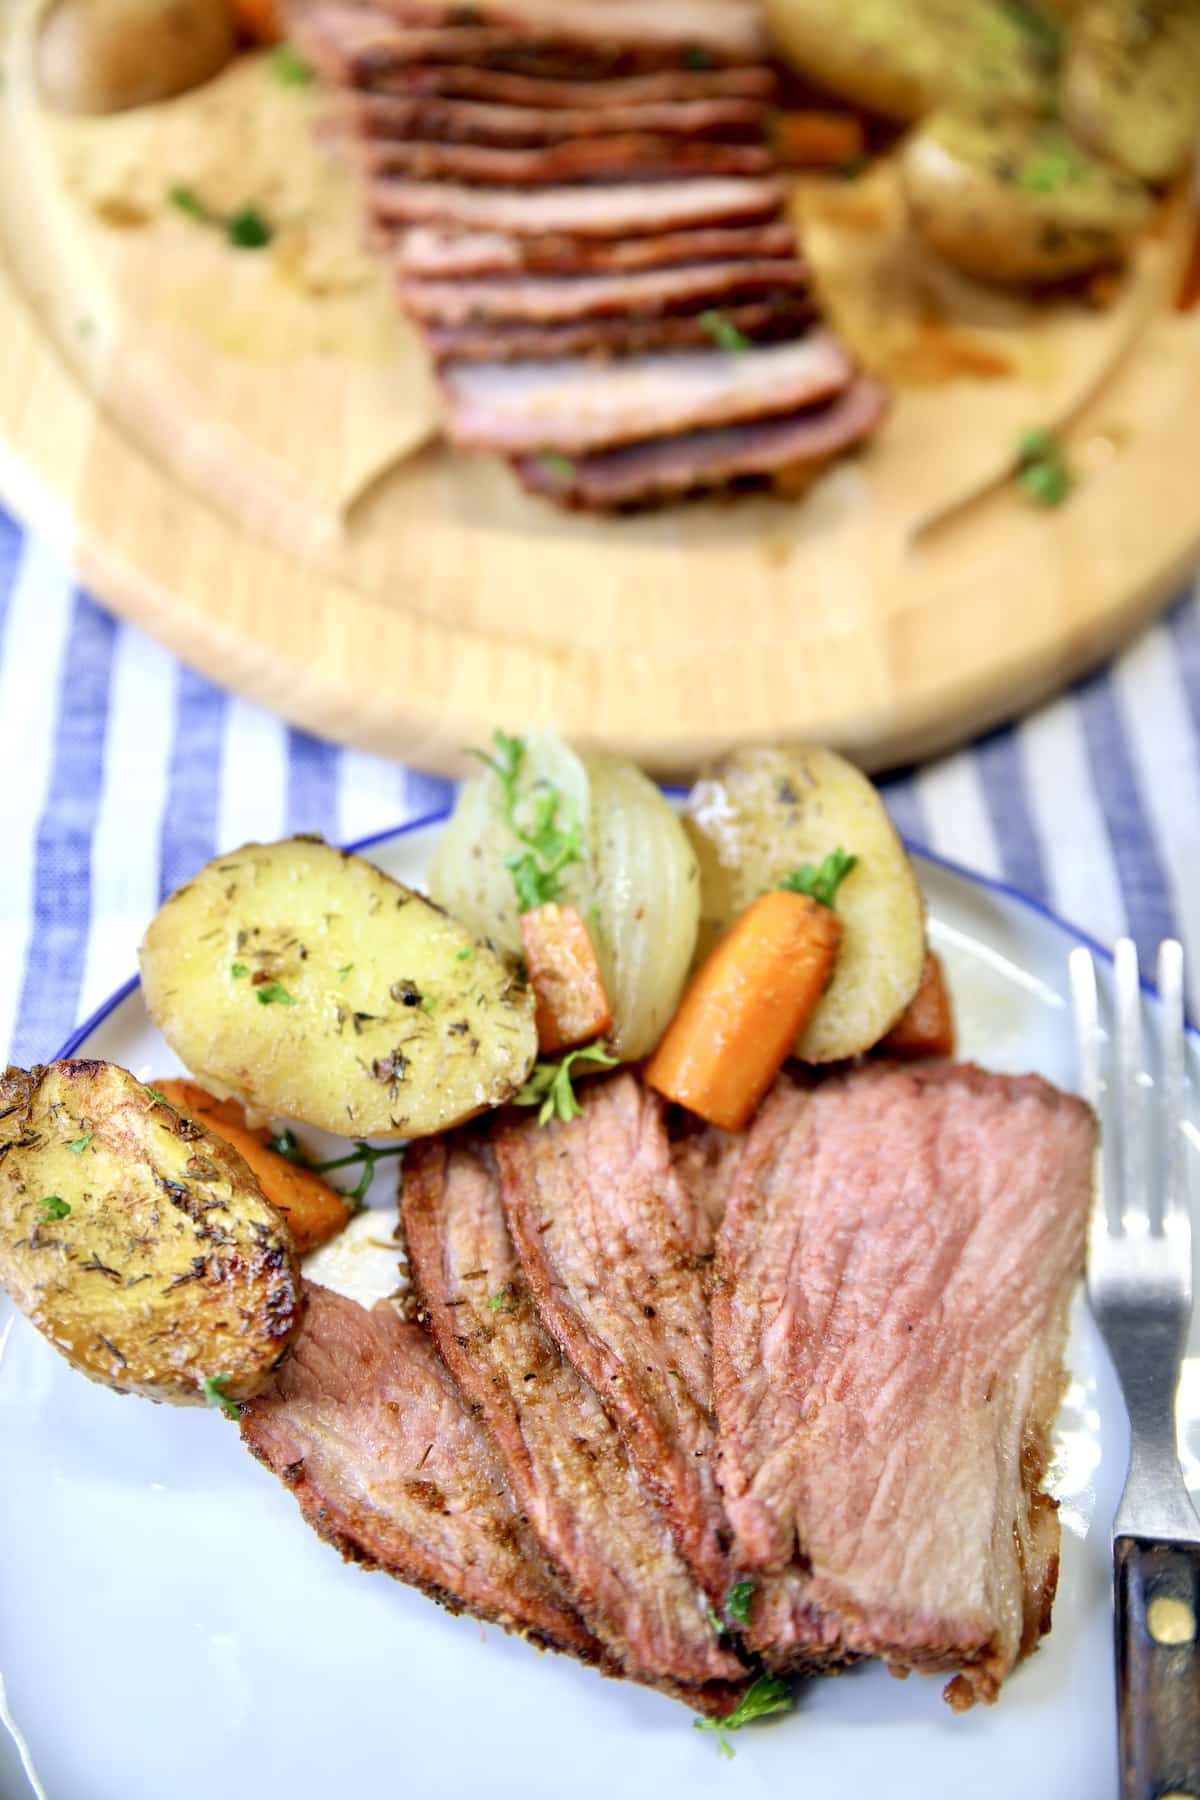 Plate of sliced roast beef and vegetables.